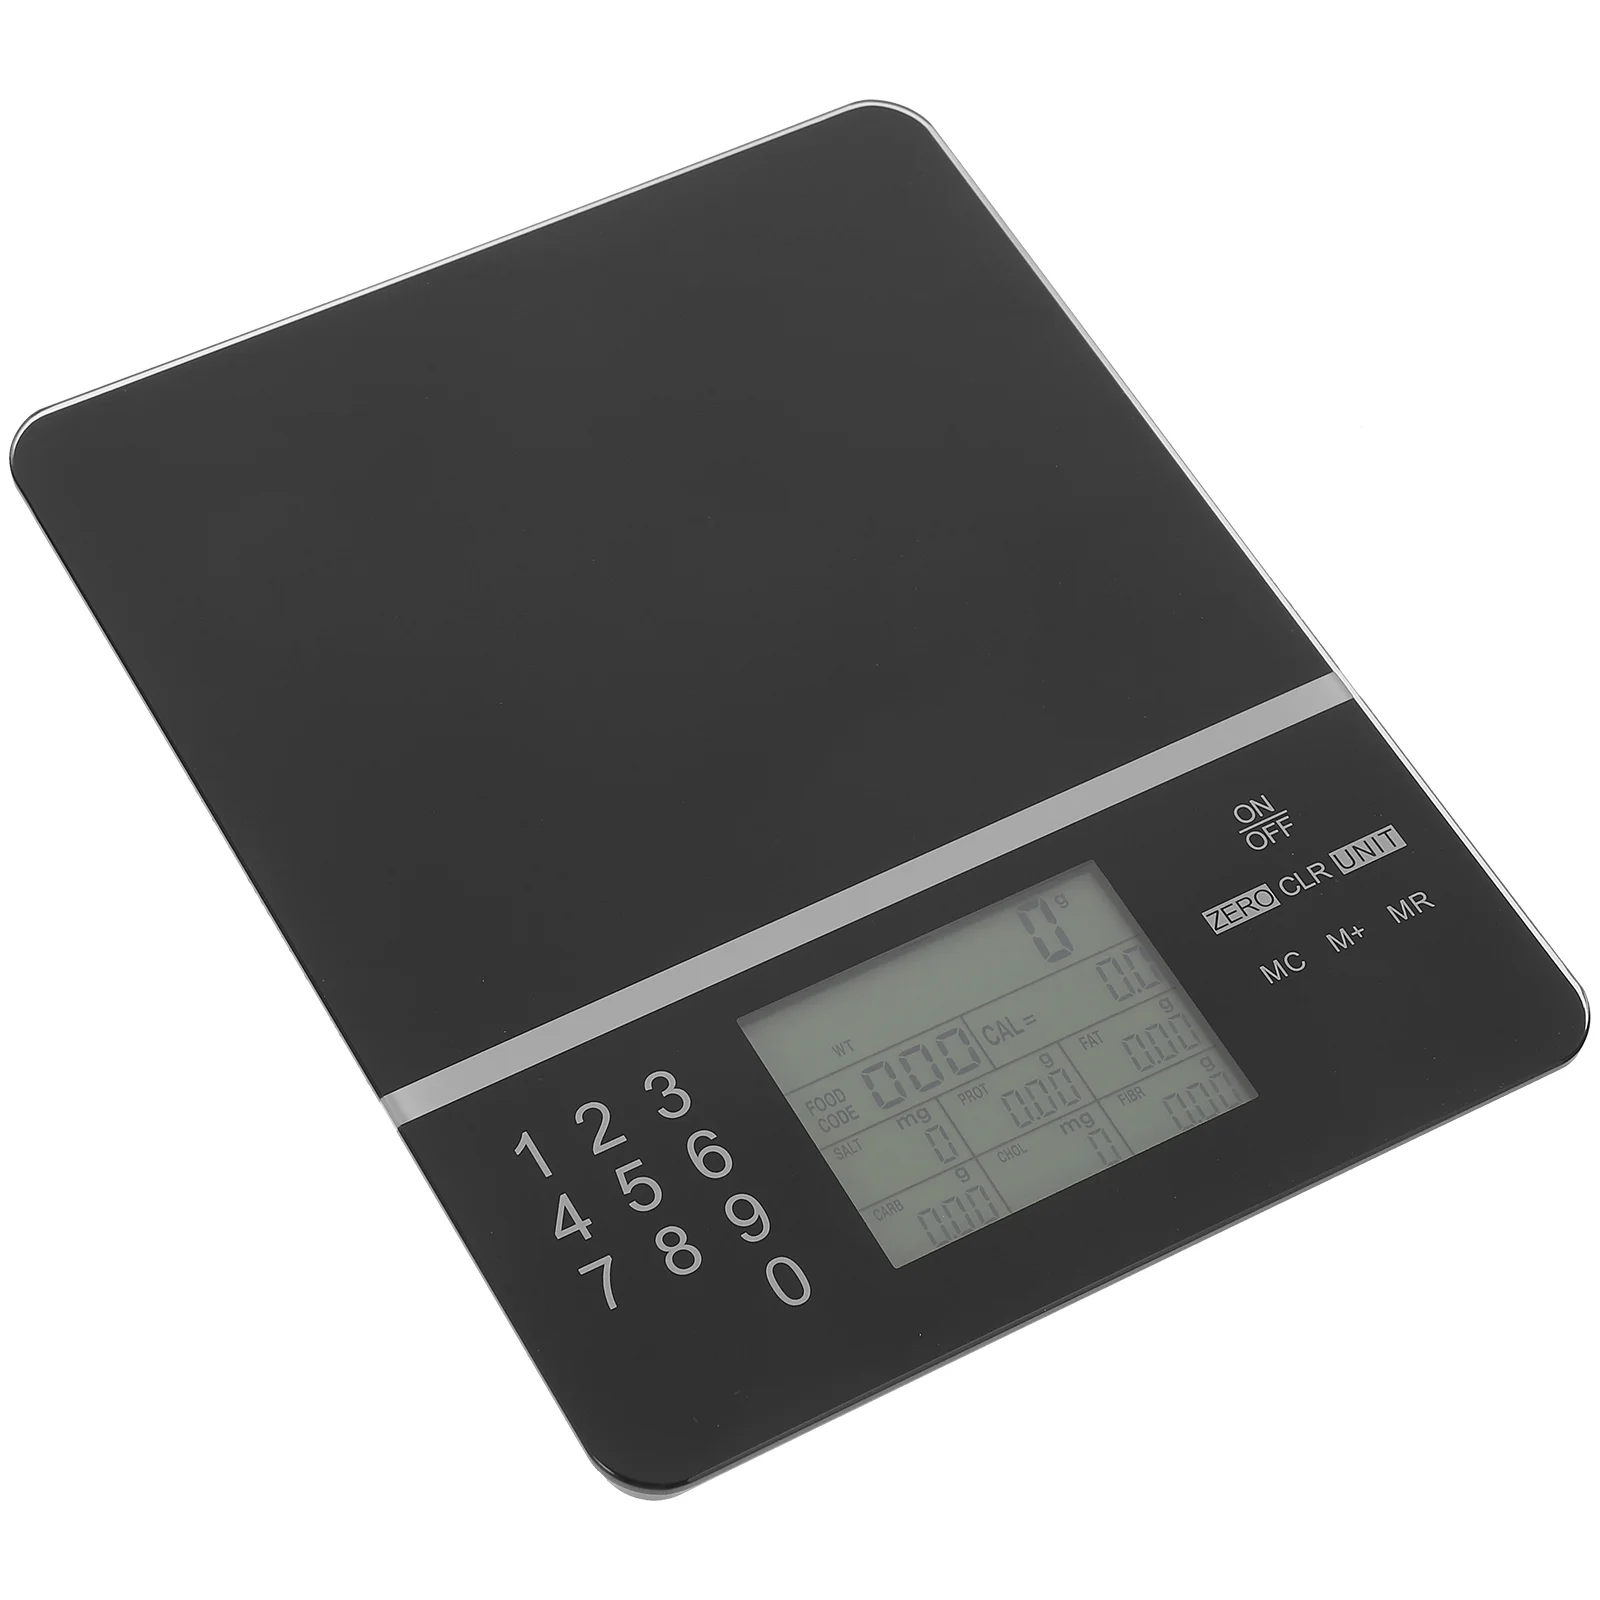 

Scale Kitchen Food Weight Grams Digital Accurate Meat Cooking Highly Scales Baking Ounces Weigh Precise Weighing Equipment Mini